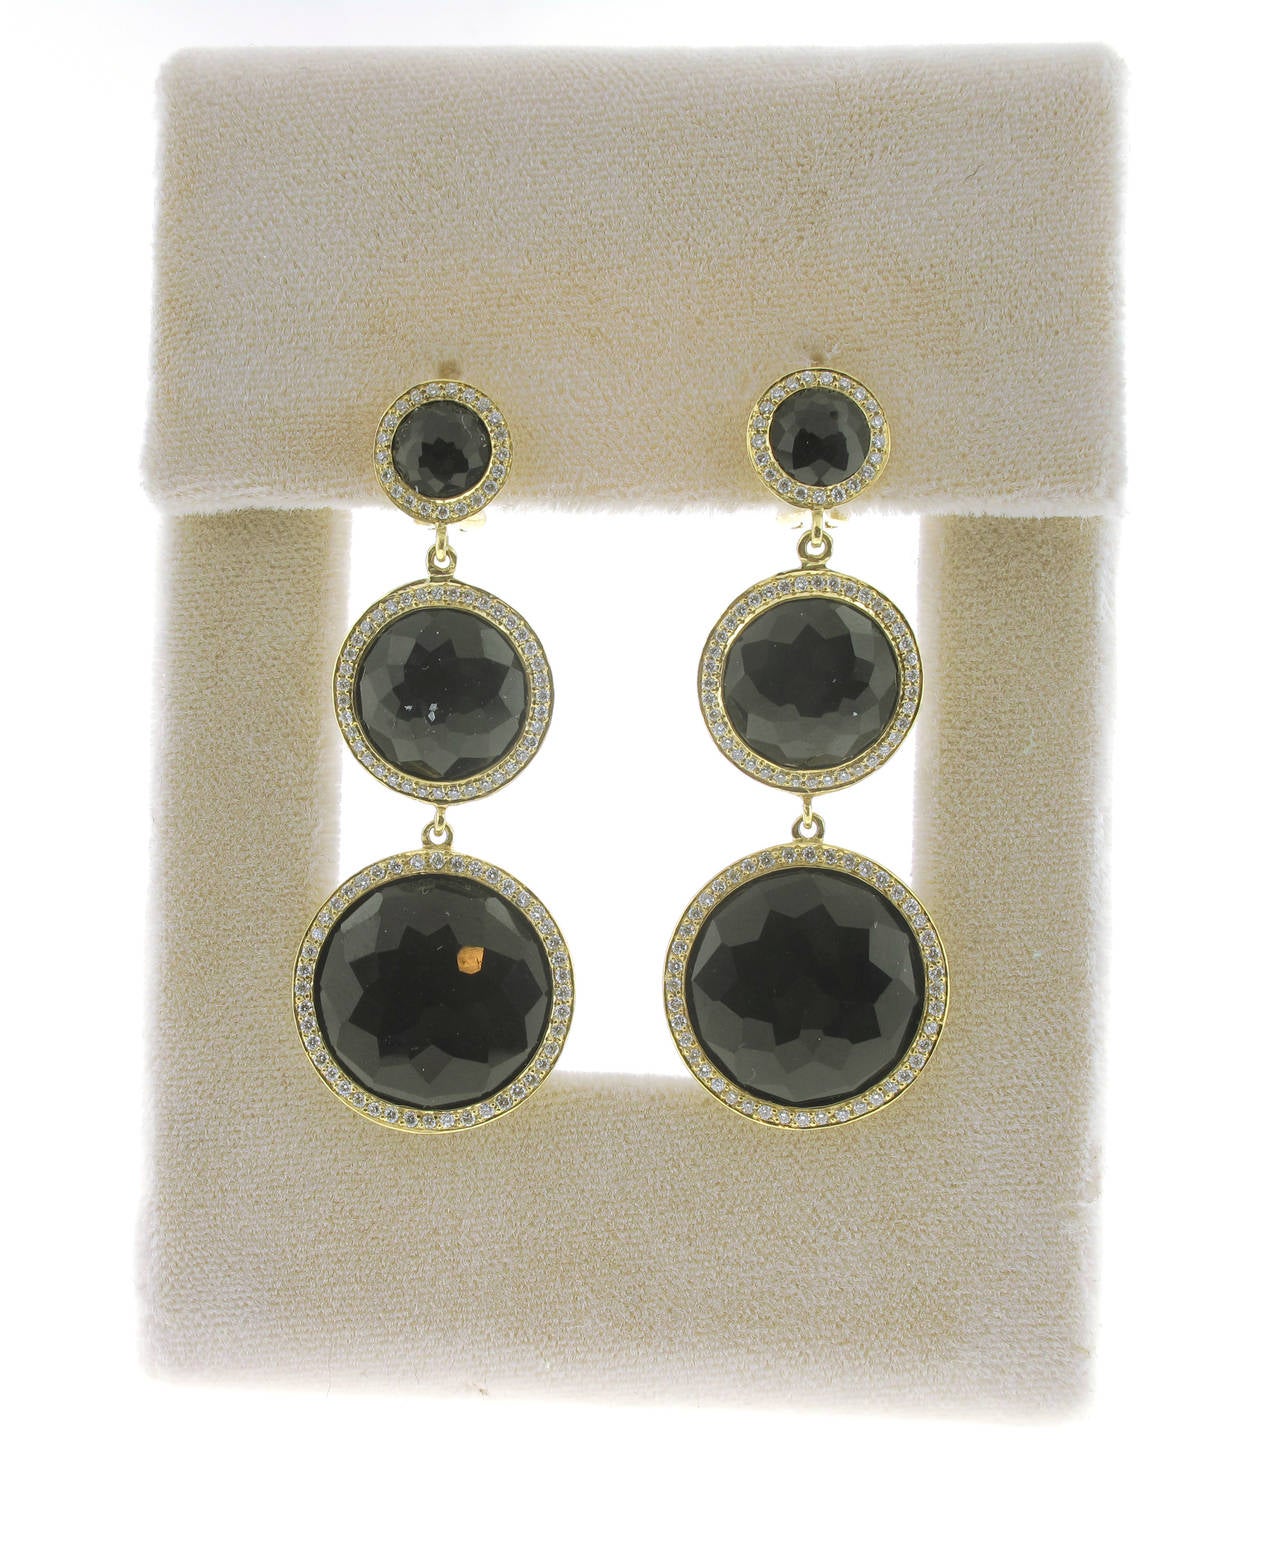 These Ippolita Gold Rock Candy 3-Drop Earrings are made in 18 karat yellow gold and feature 6 